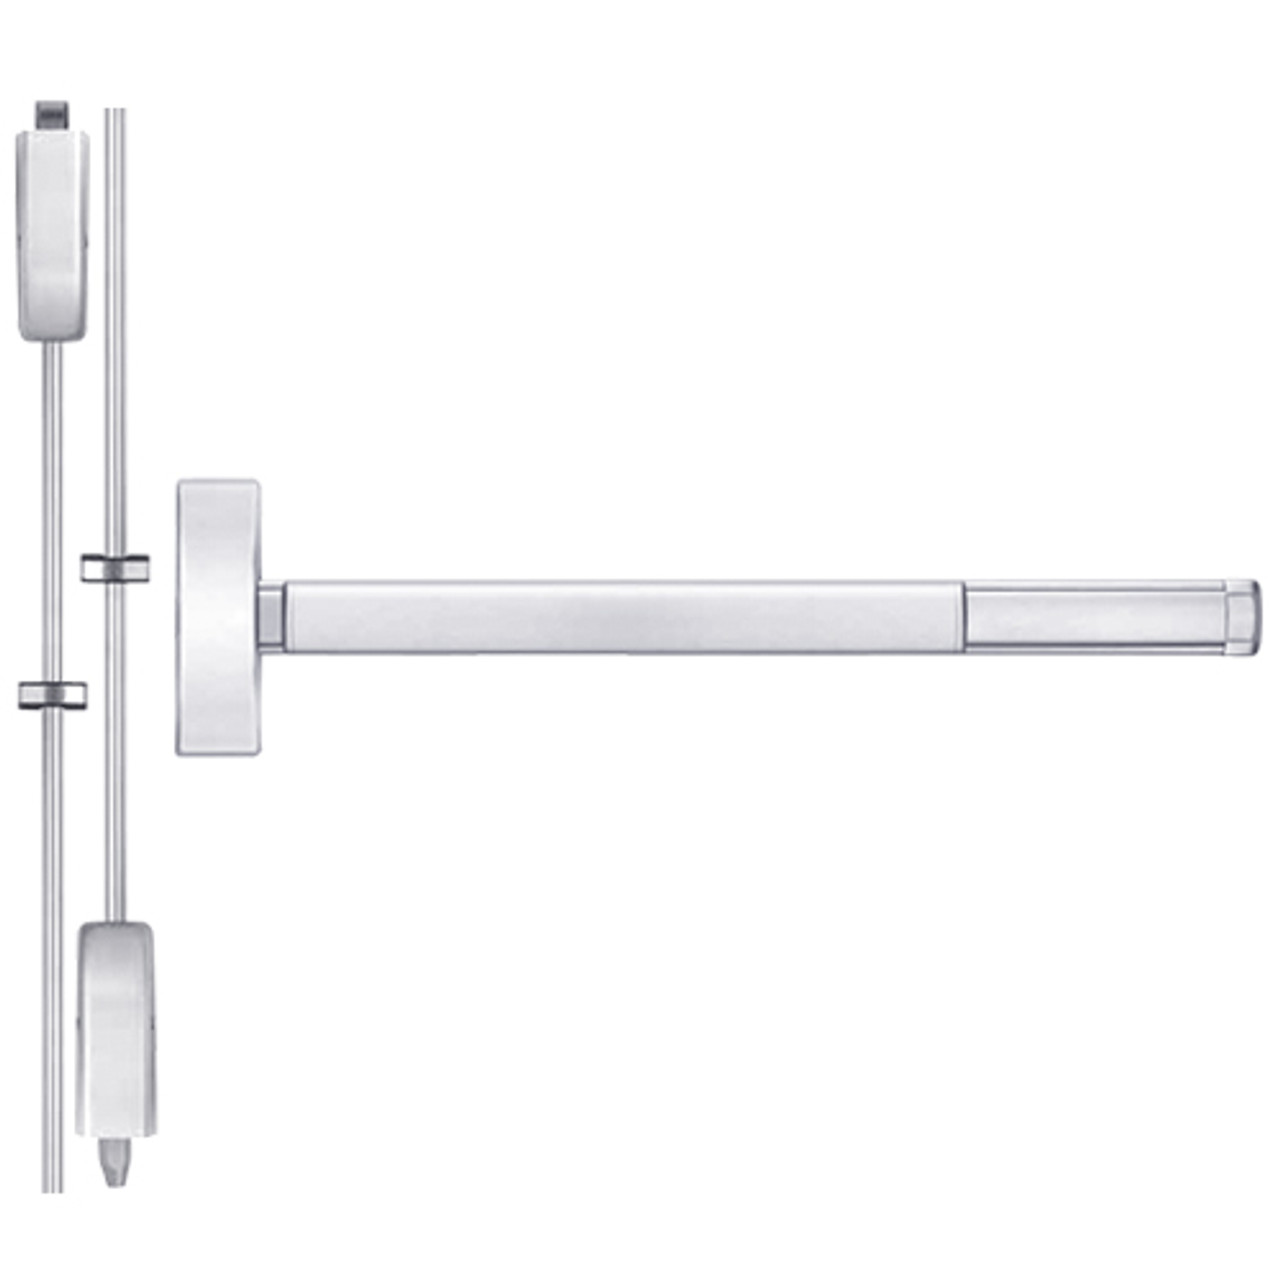 DEFL2203-625-48 PHI 2200 Series Fire Rated Apex Surface Vertical Rod Device with Delayed Egress Prepped for Key Retracts Latchbolt in Bright Chrome Finish